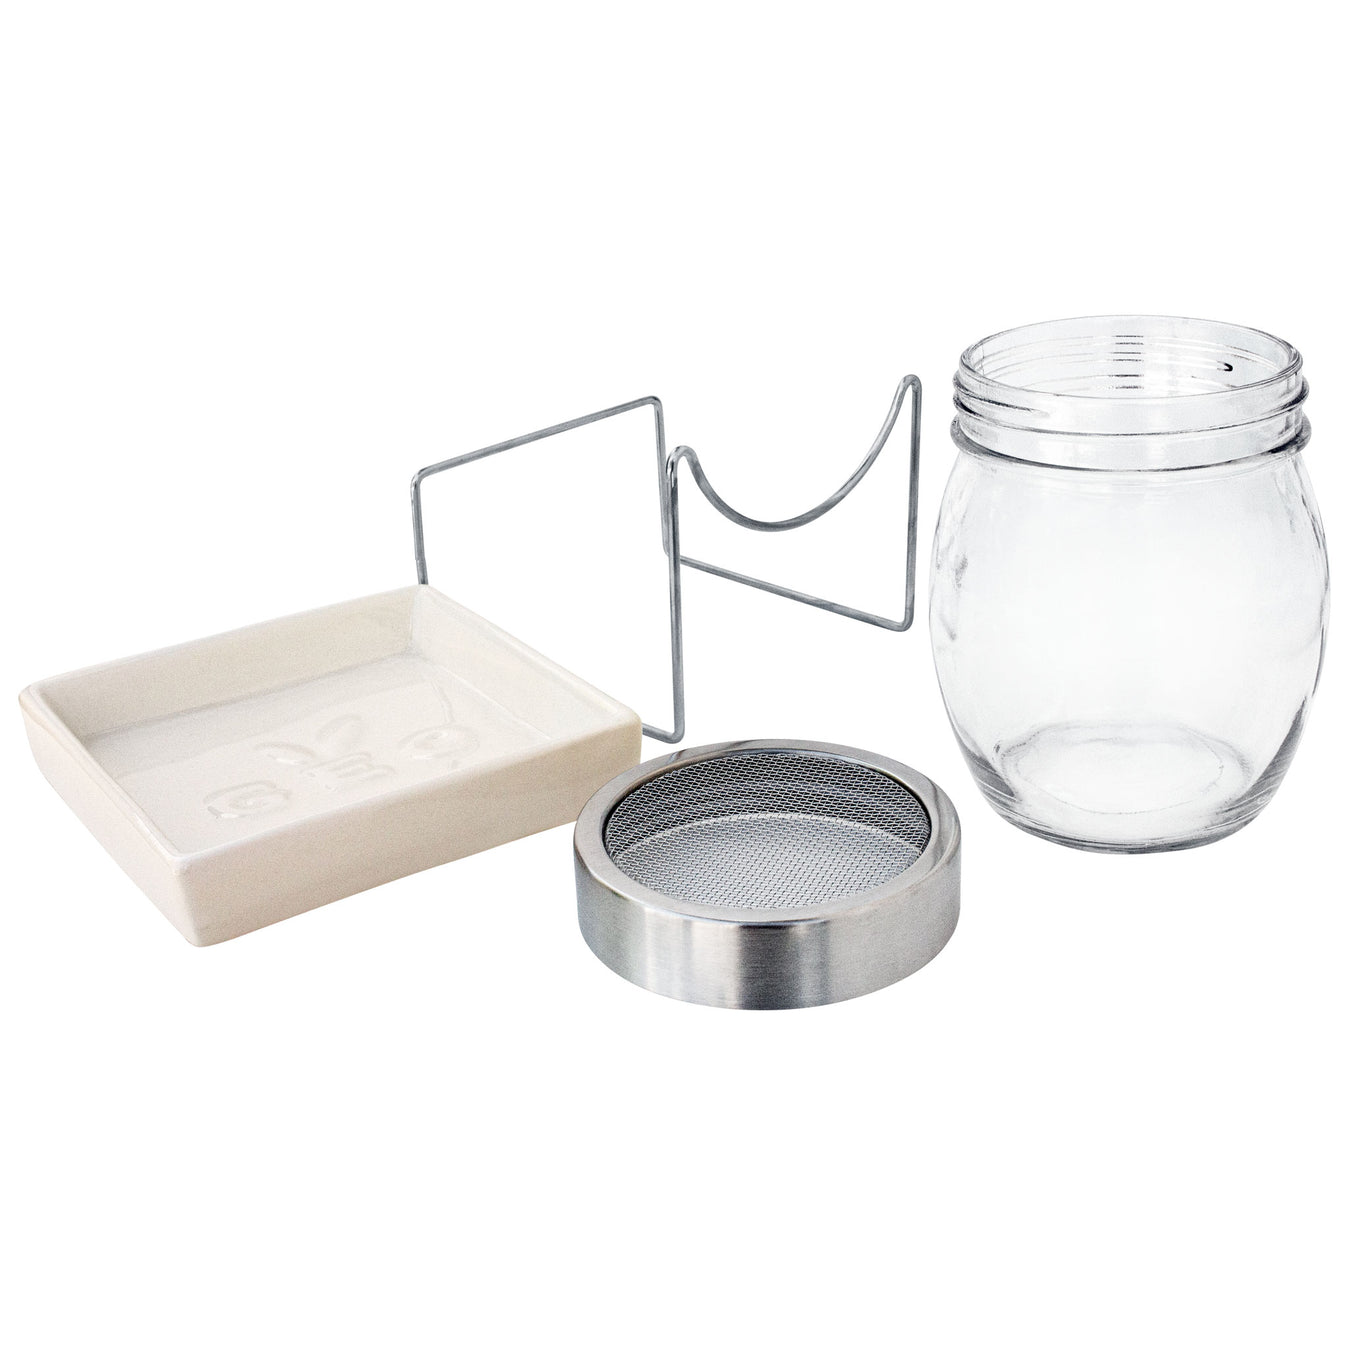 GEO Sprouting Jar System with Stainless Steel Rack and Ceramic Base Plate